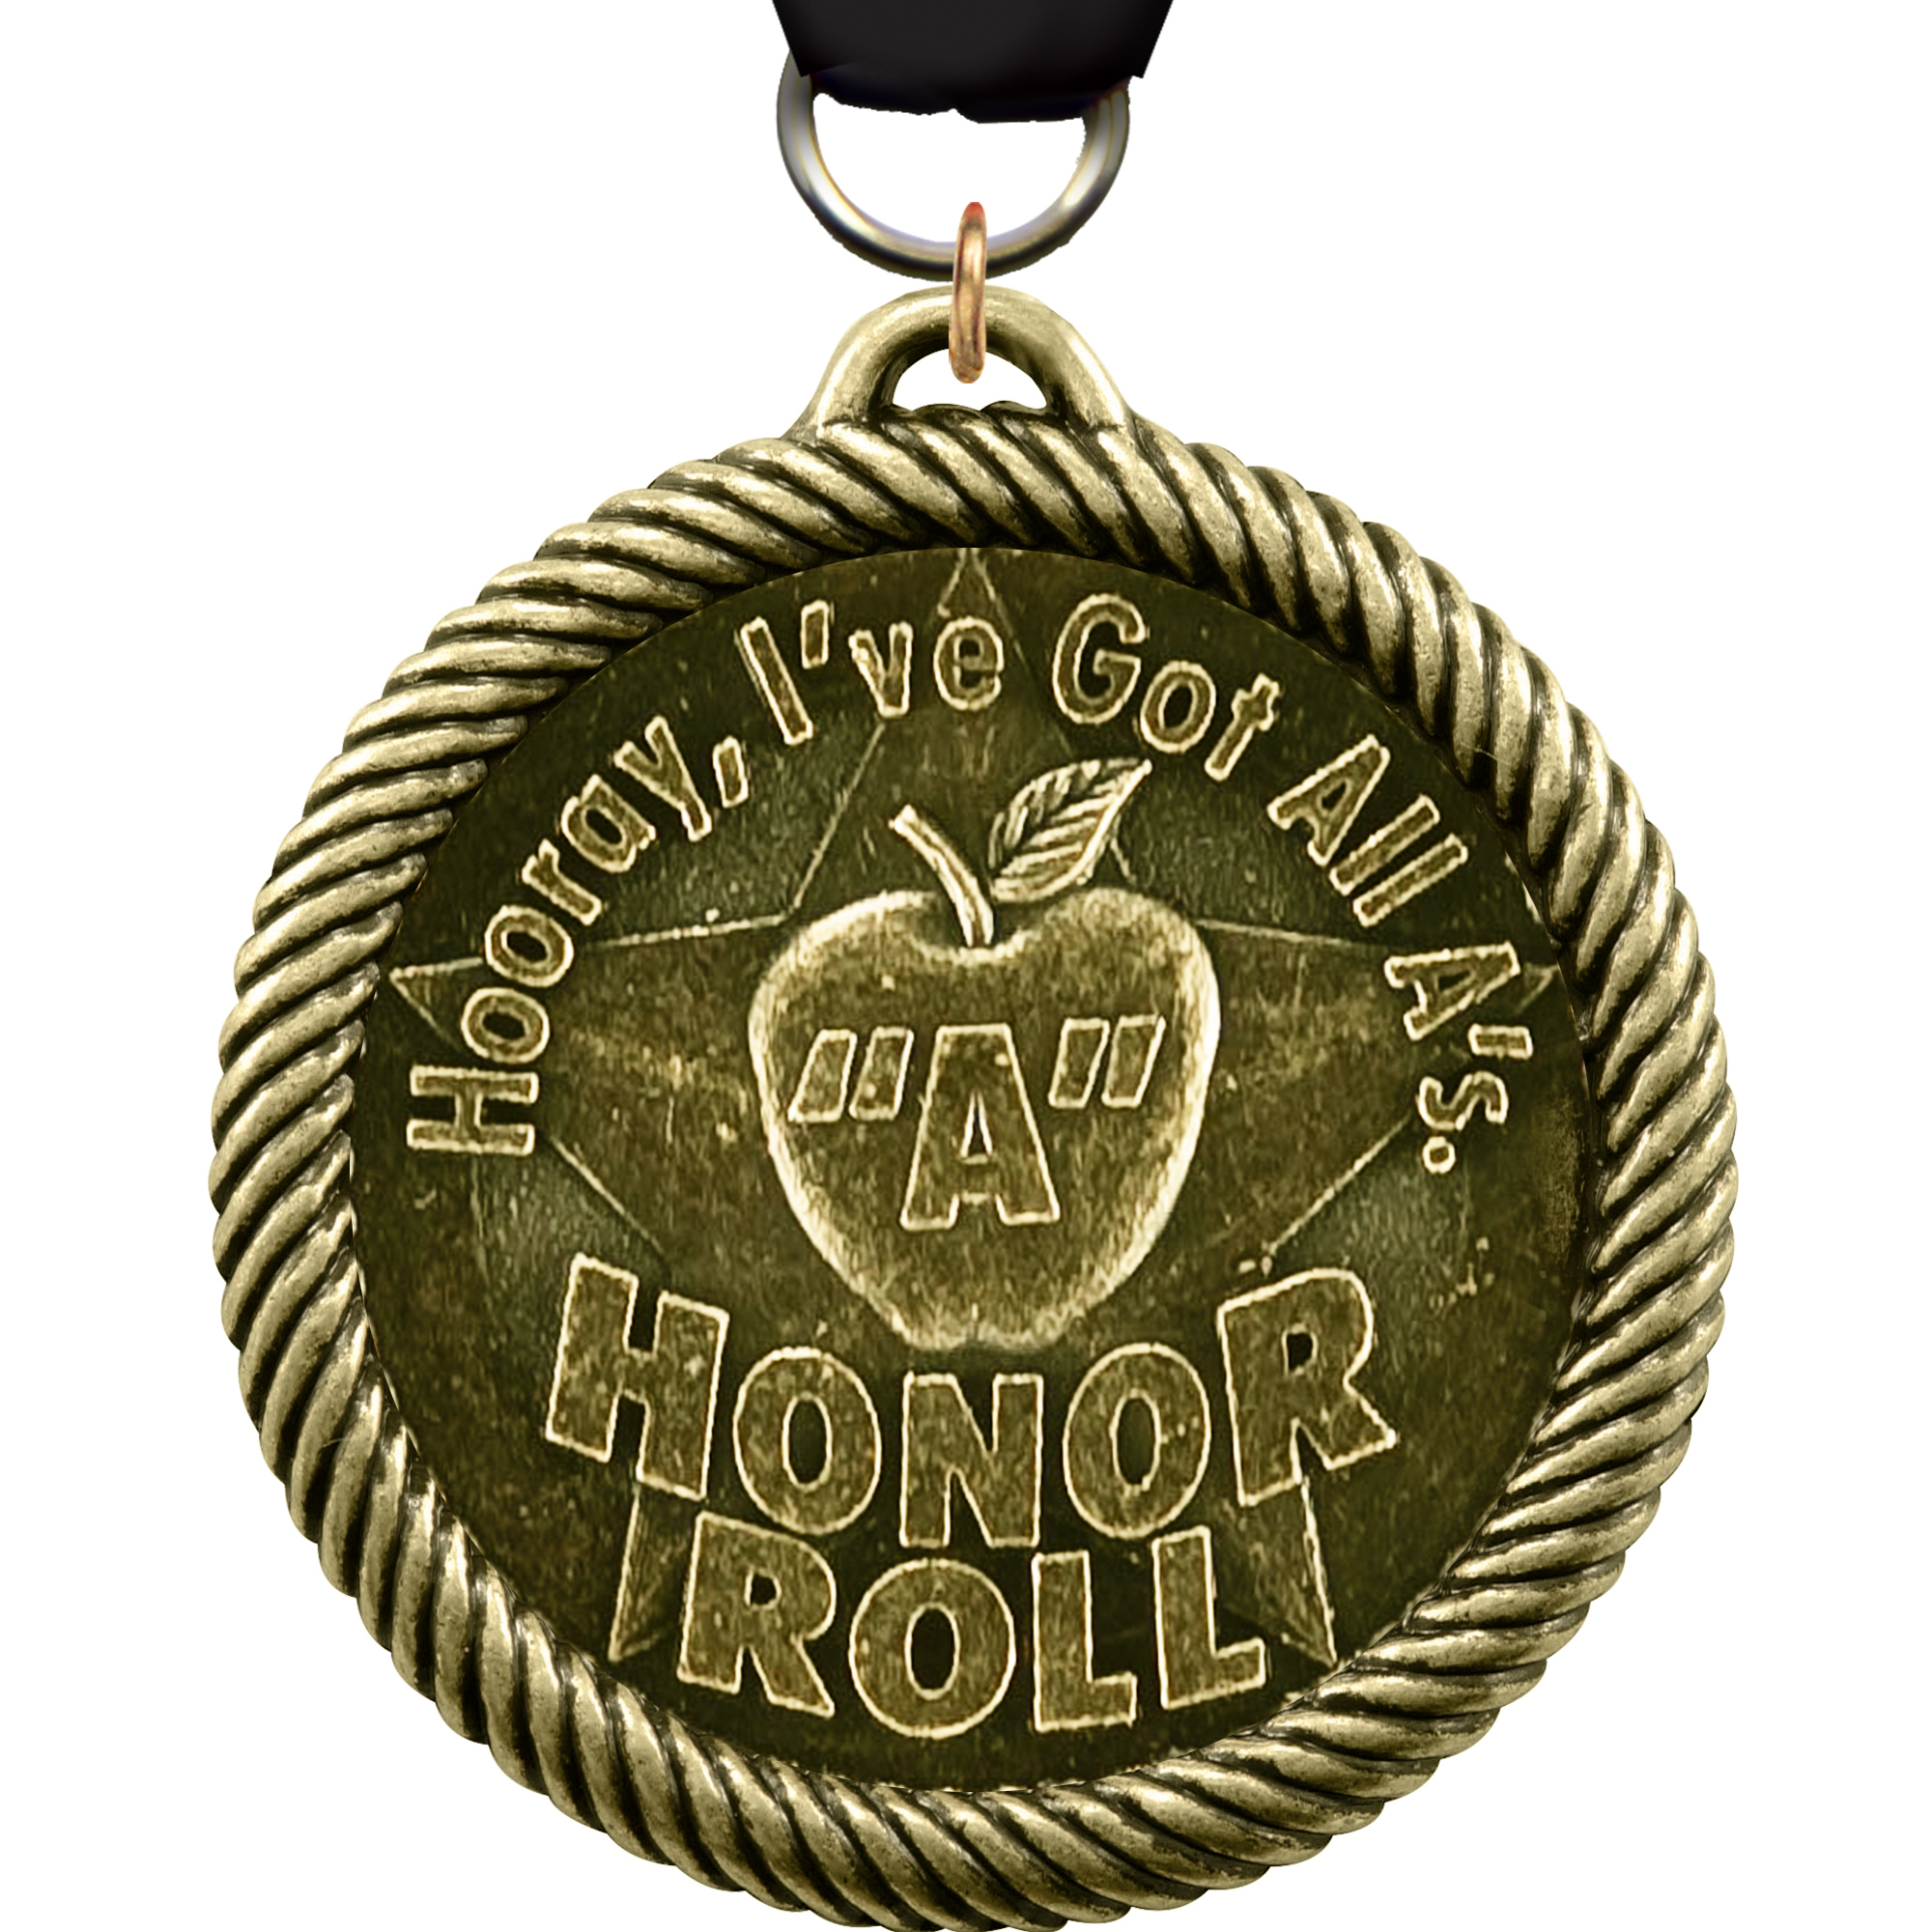 Hooray!- I've Got All A's Honor Roll Scholastic Medal